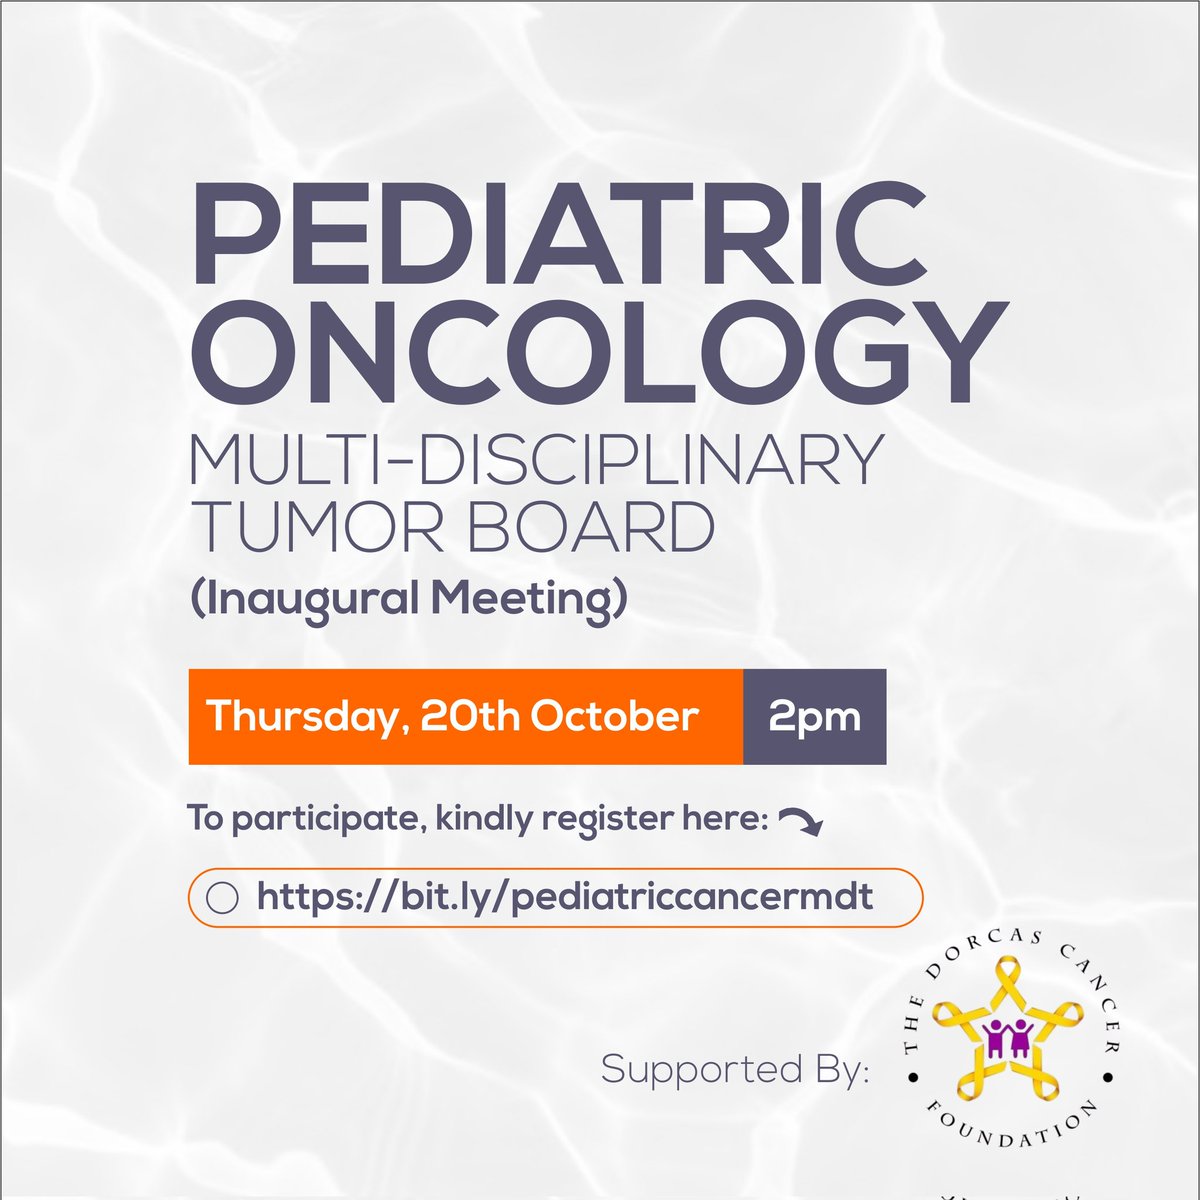 Are you a pediatric oncologist/hematologist/radiation /surgeon in Nigeria? Do you work or have an interest in pediatric oncology? Kindly use the link below to register bit.ly/pediatriccance… #ChildrenareGold #mdt #childhoodcancer #pediatriconcologist #cancer #pediatriccancer